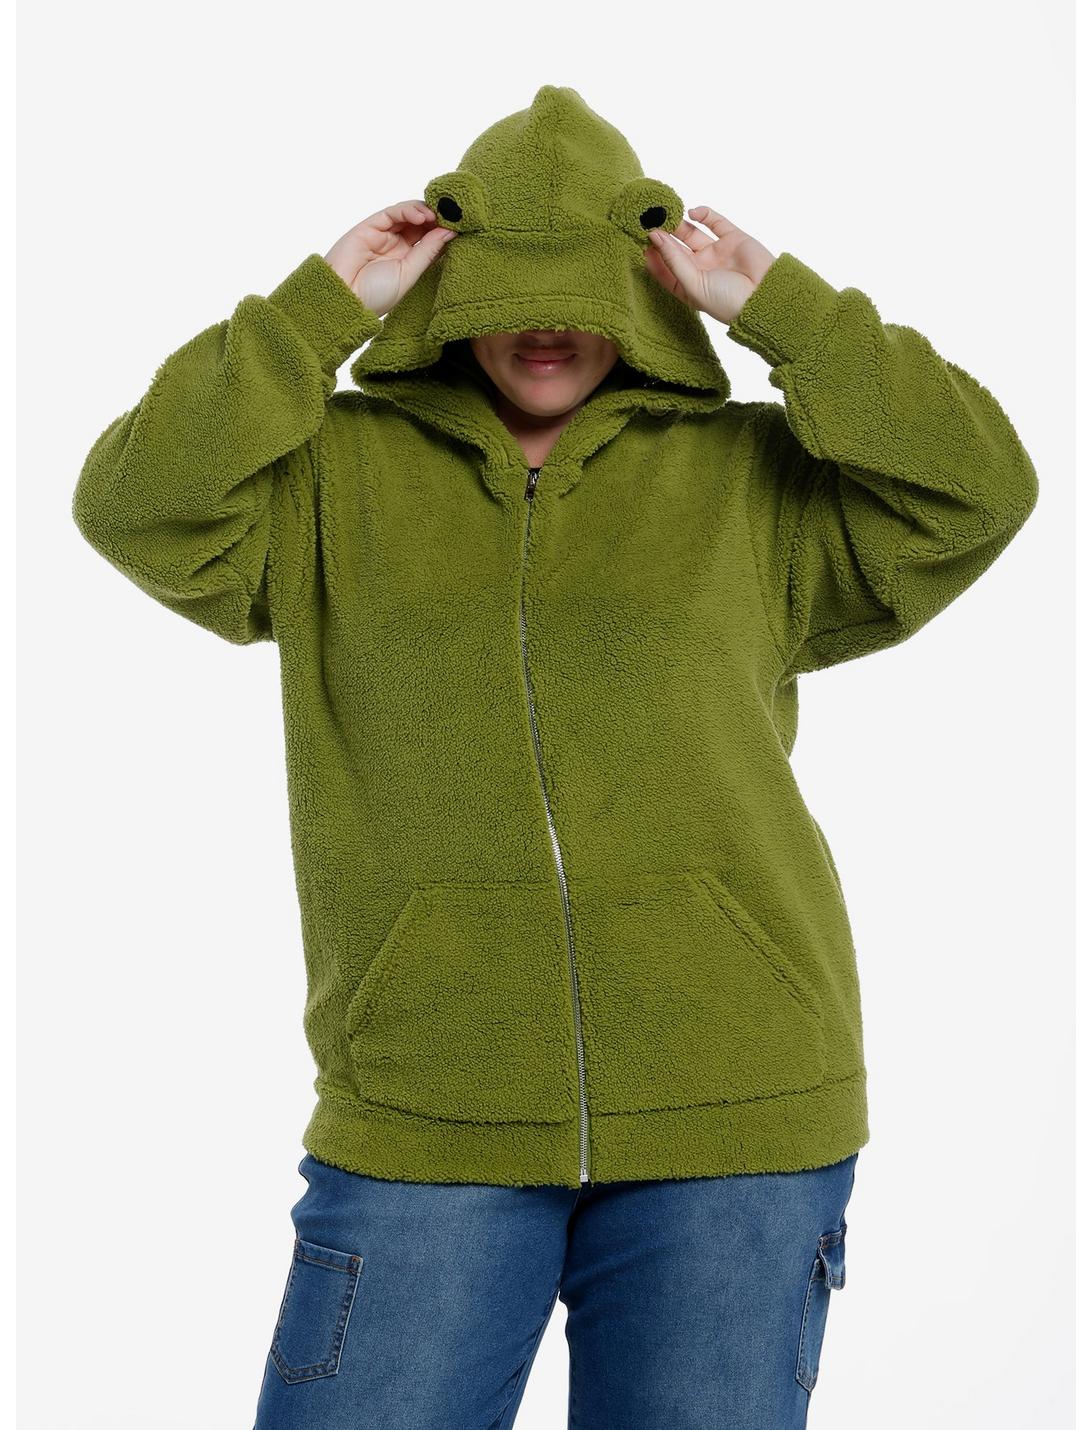 Thorn & Fable Frog Sherpa Girls Hoodie Plus Size, OLIVE, hi-res